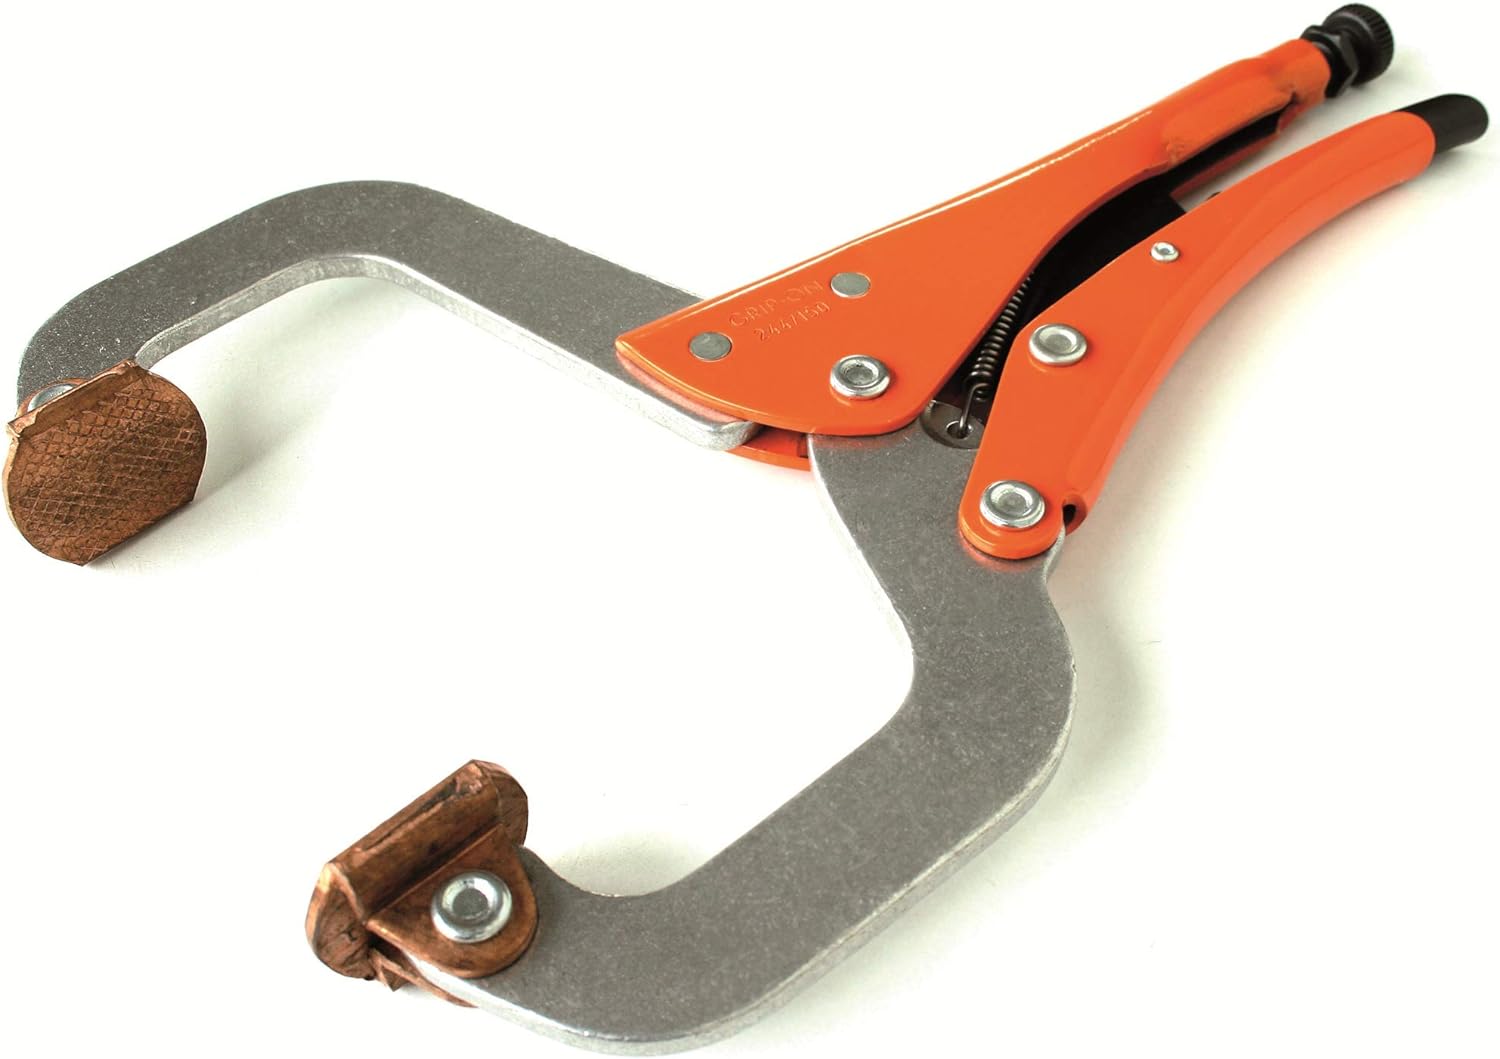 Grip-On 14" Aluminum Alloy Stepped C-Clamp Locking Pliers, 244-150